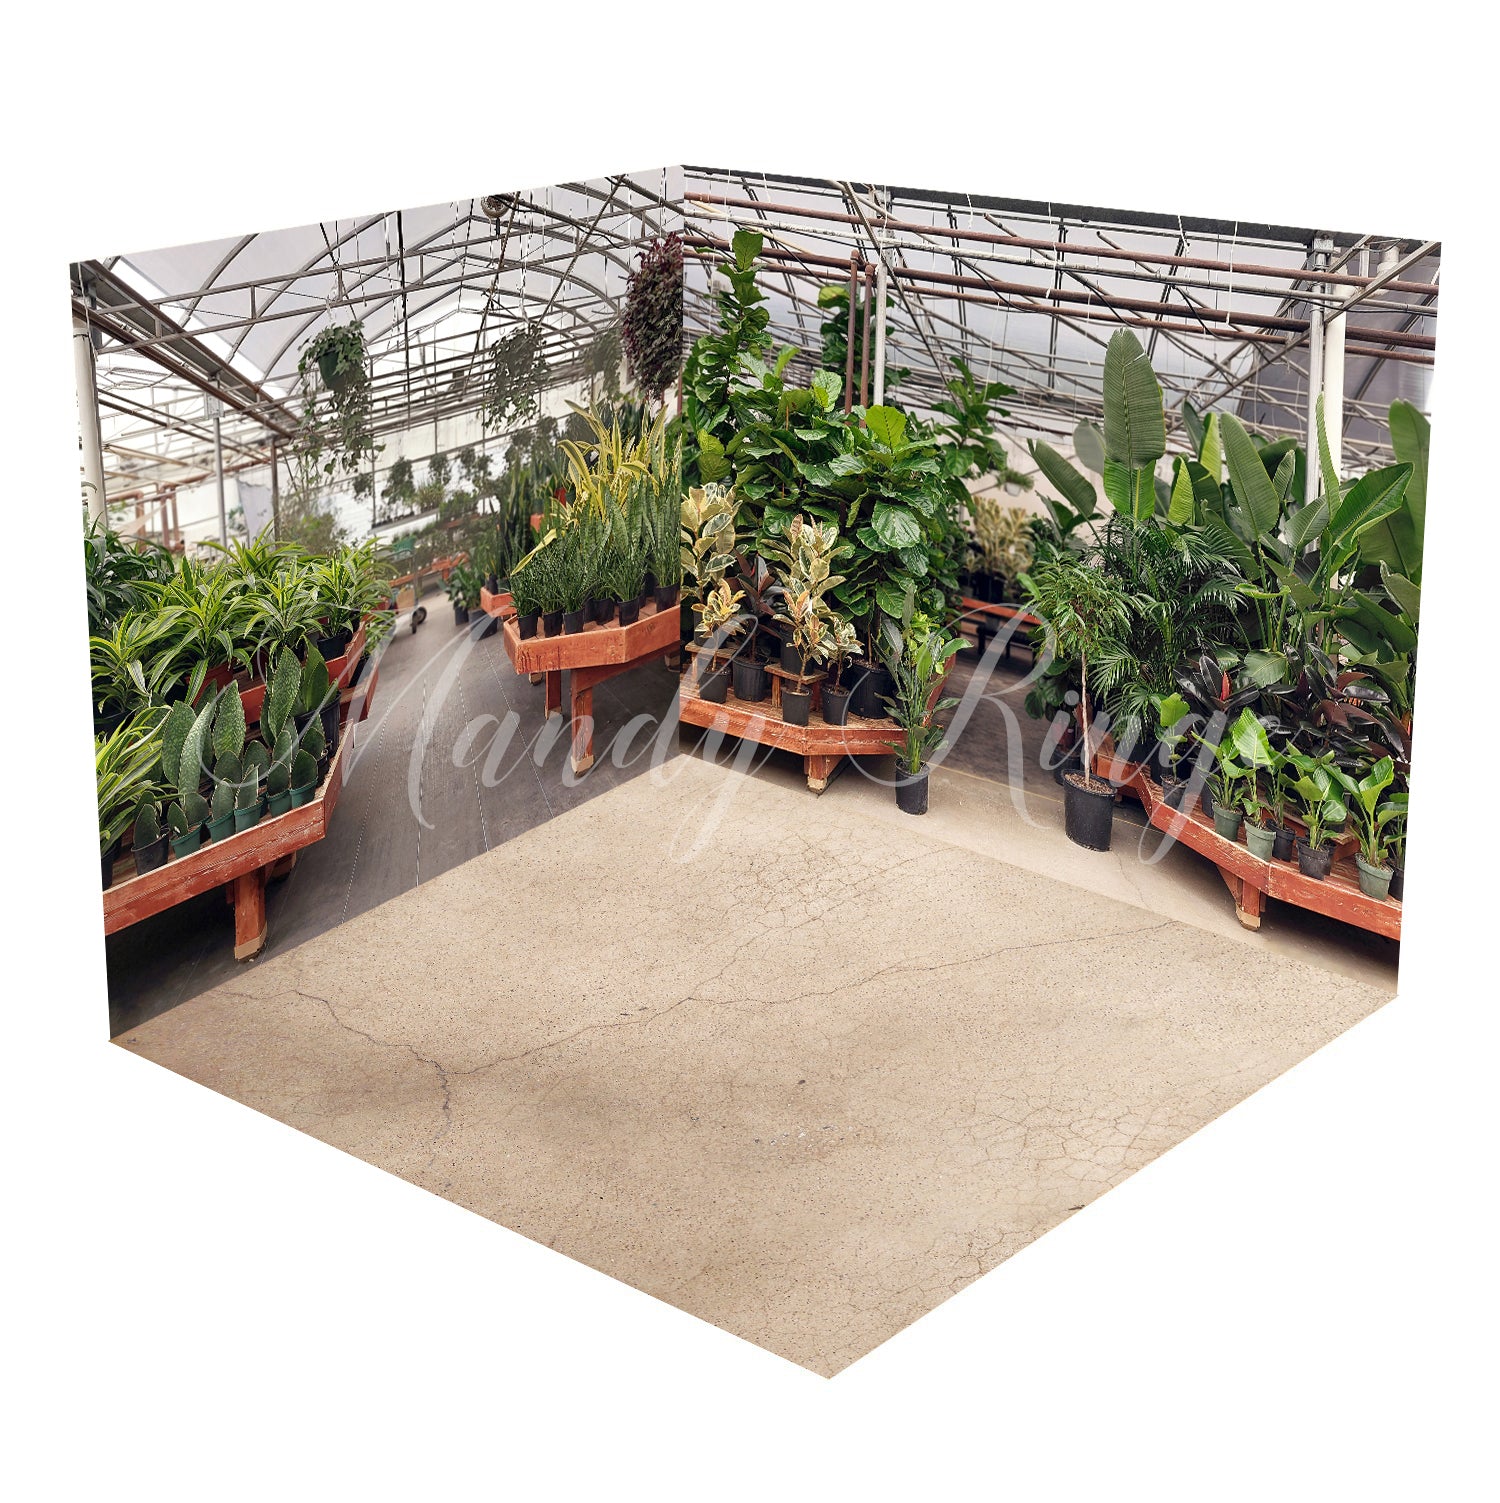 Kate Tropical Greenhouse Interior Summer Plants Room Set Designed by Mandy Ringe Photography(8ftx8ft&10ftx8ft&8ftx10ft)